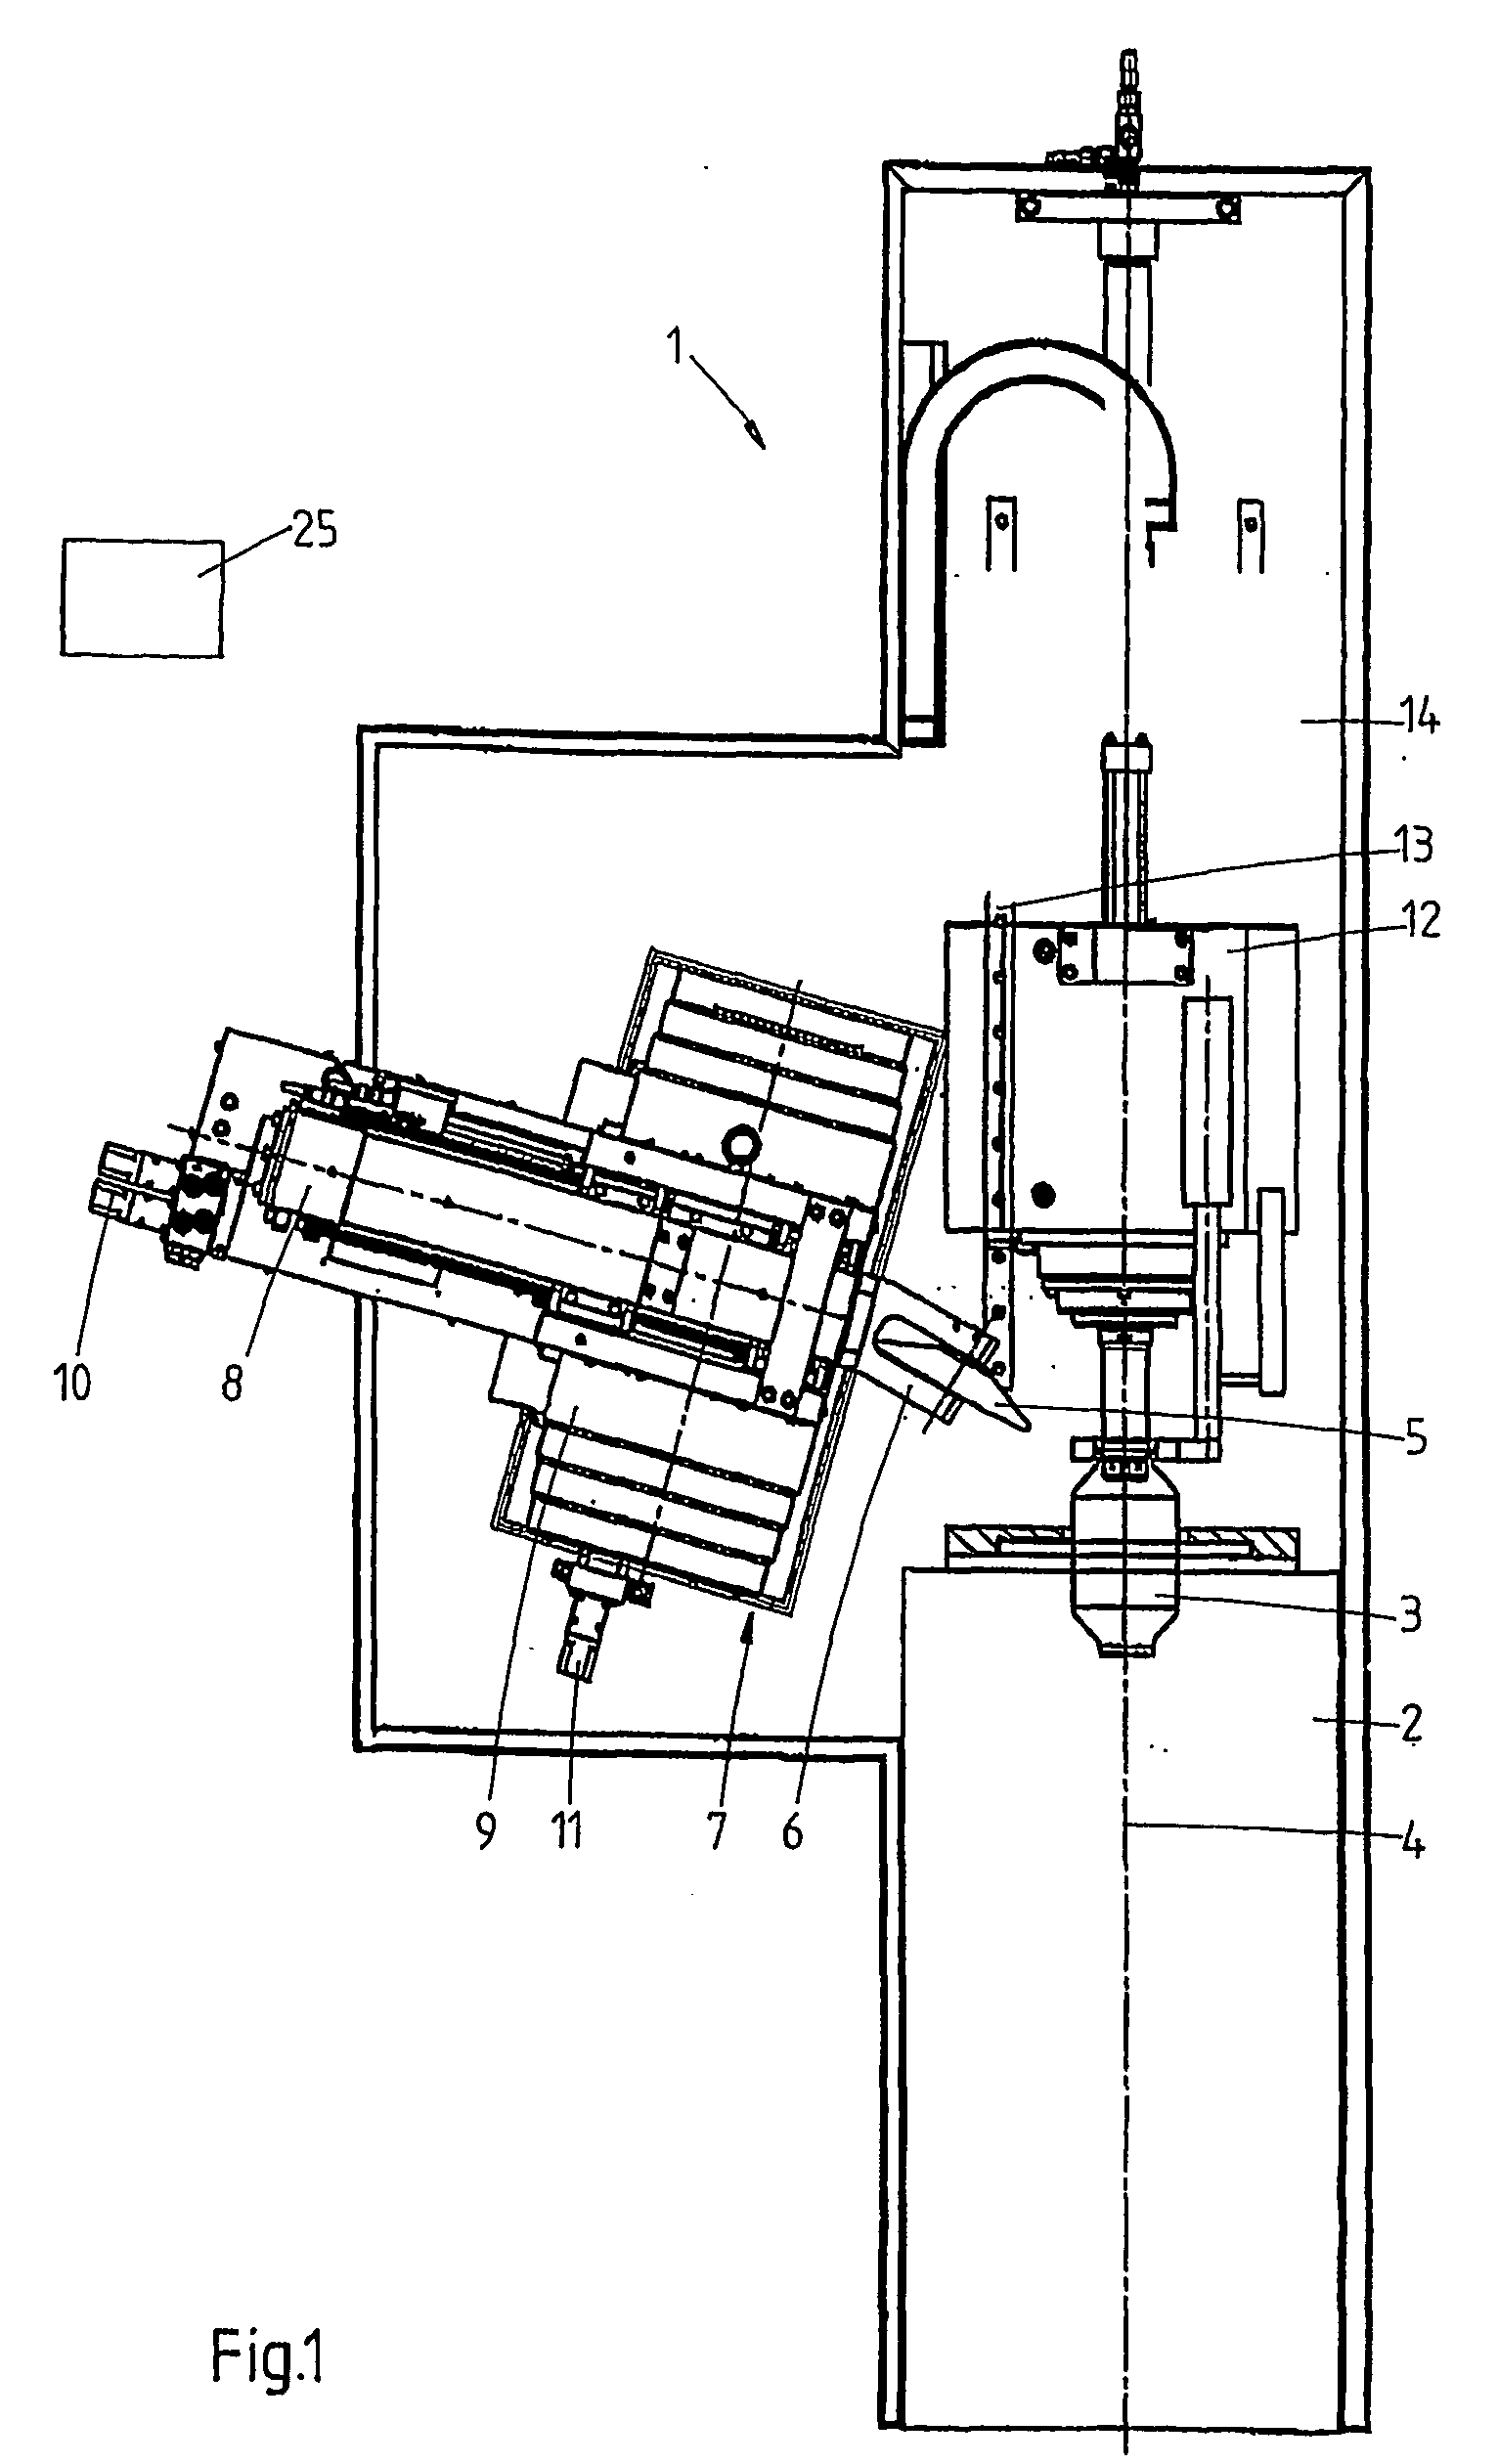 Method and forming machine for deforming a workpiece